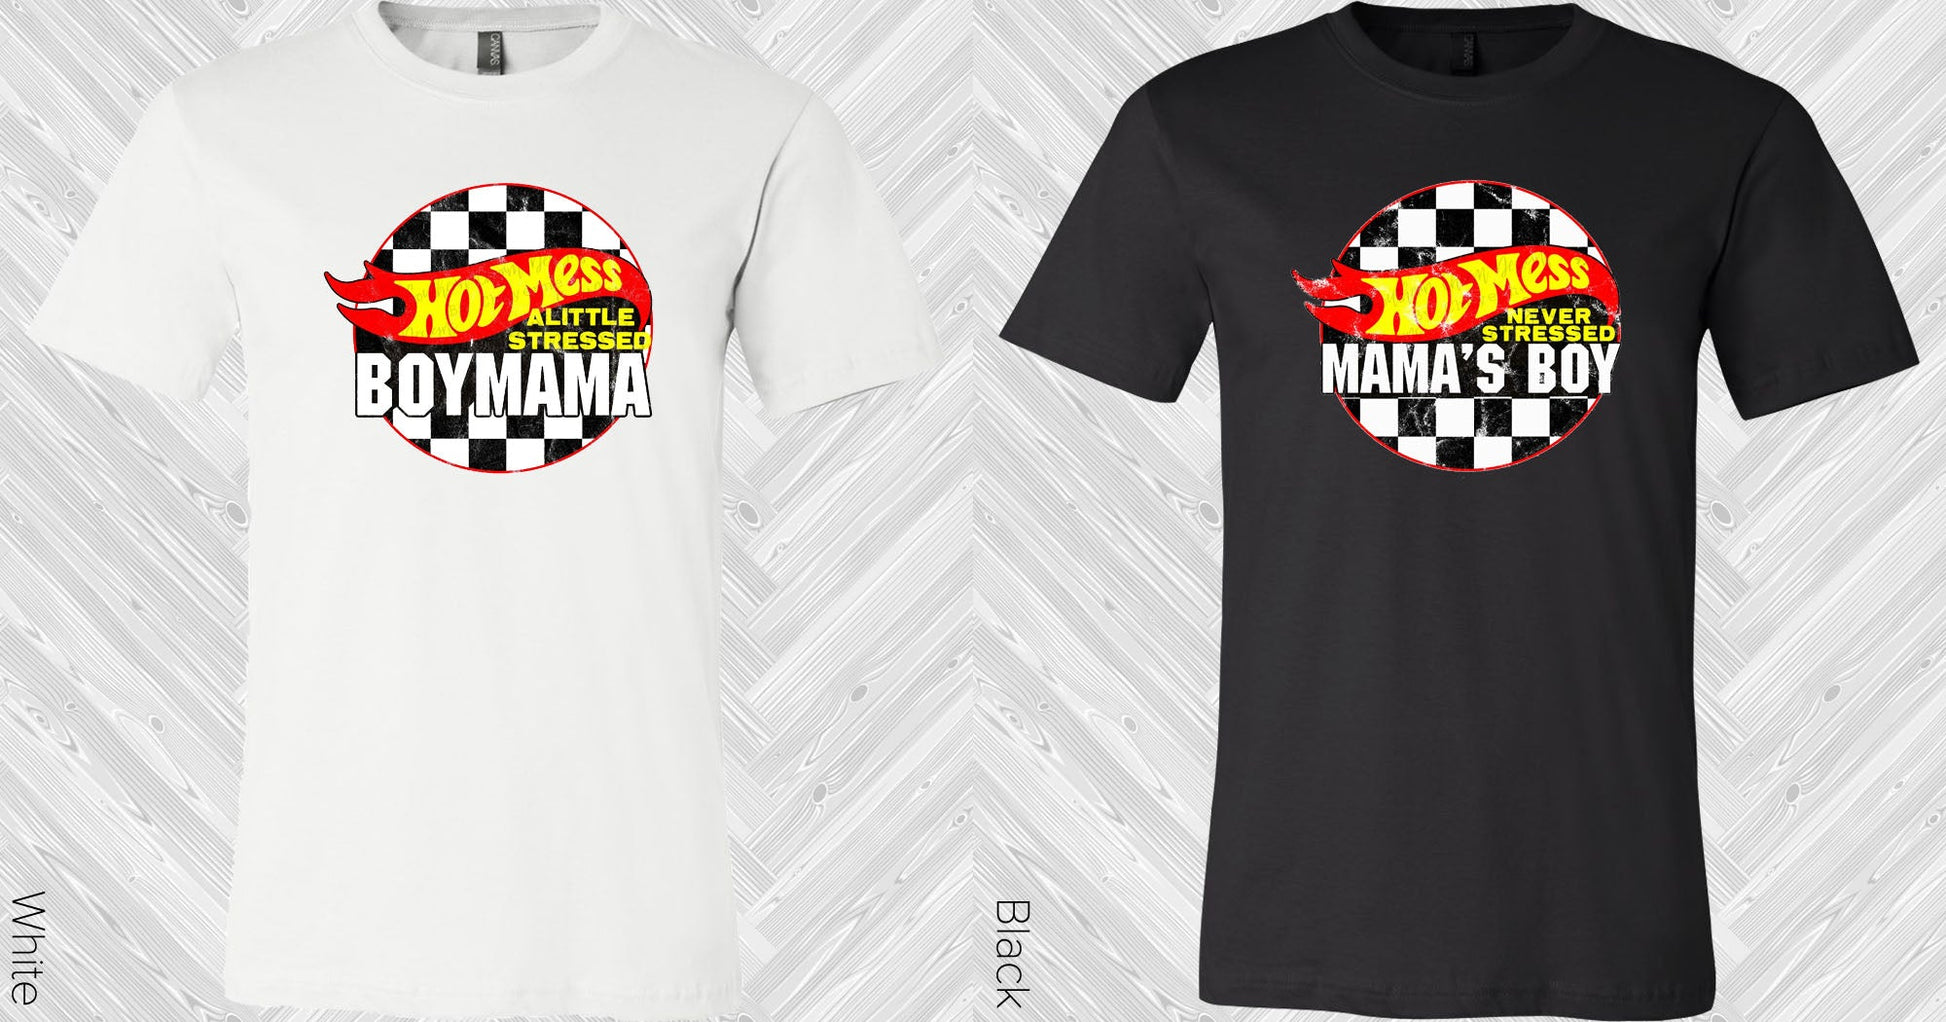 Hot Mess A Little Stressed Boy Mama Graphic Tee Graphic Tee